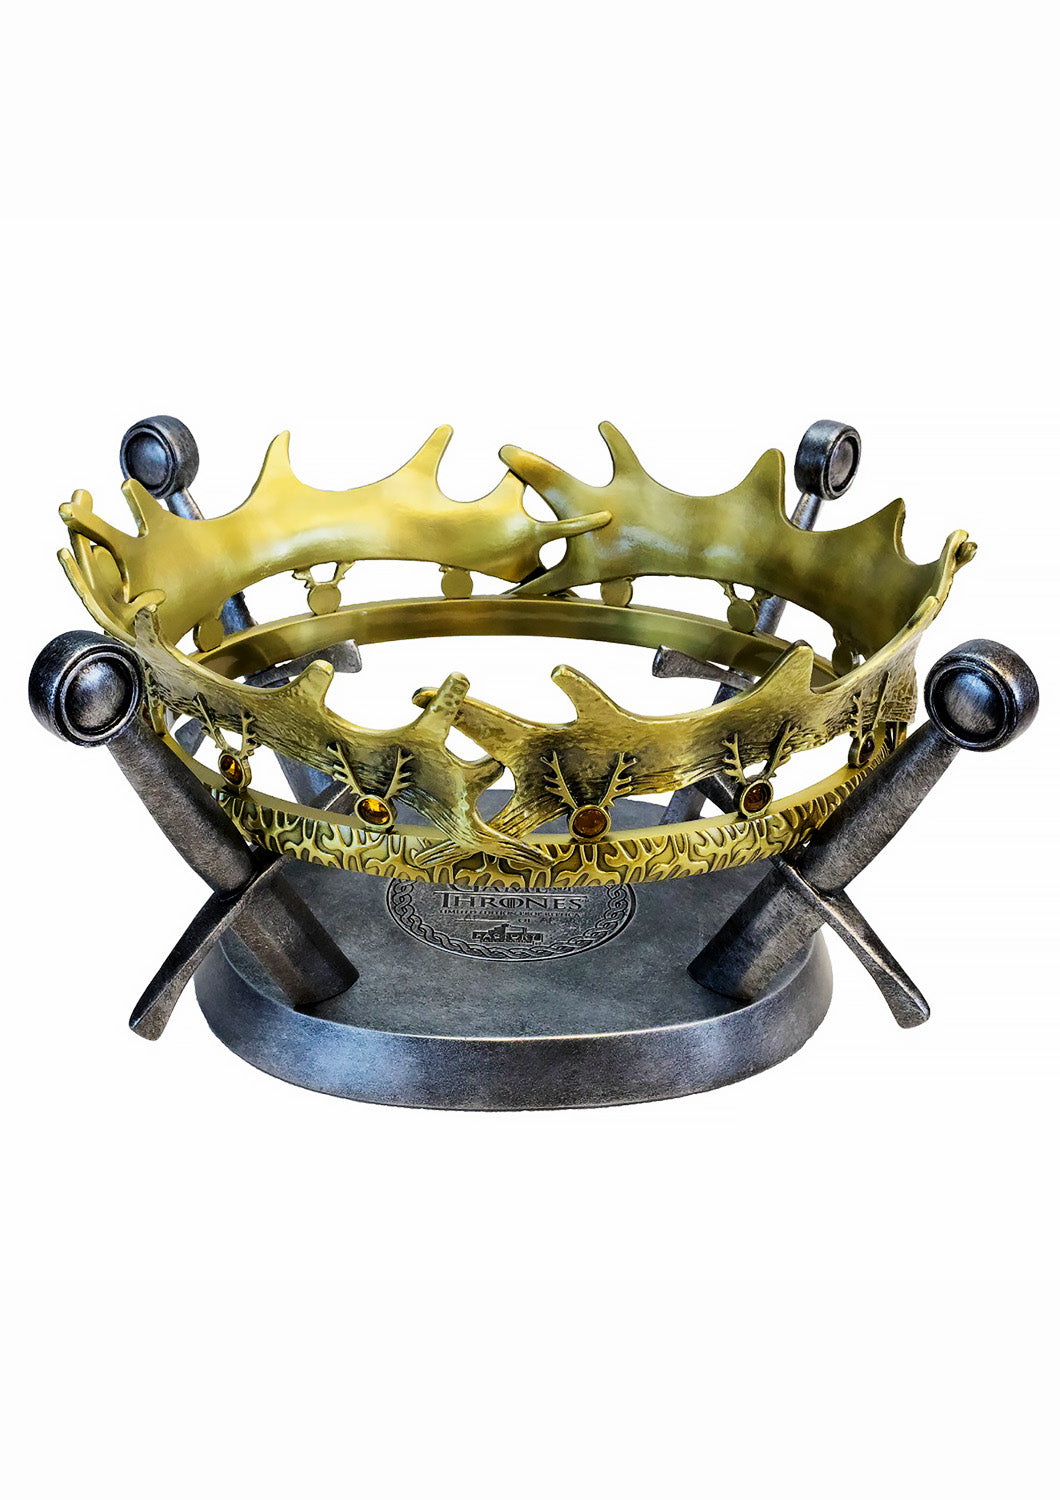 FACTORY ENTERTAINMENT GAME OF THRONES ROBERT'S CROWN REPLICA LIMITED EDITION - 408453 - Anotoys Collectibles